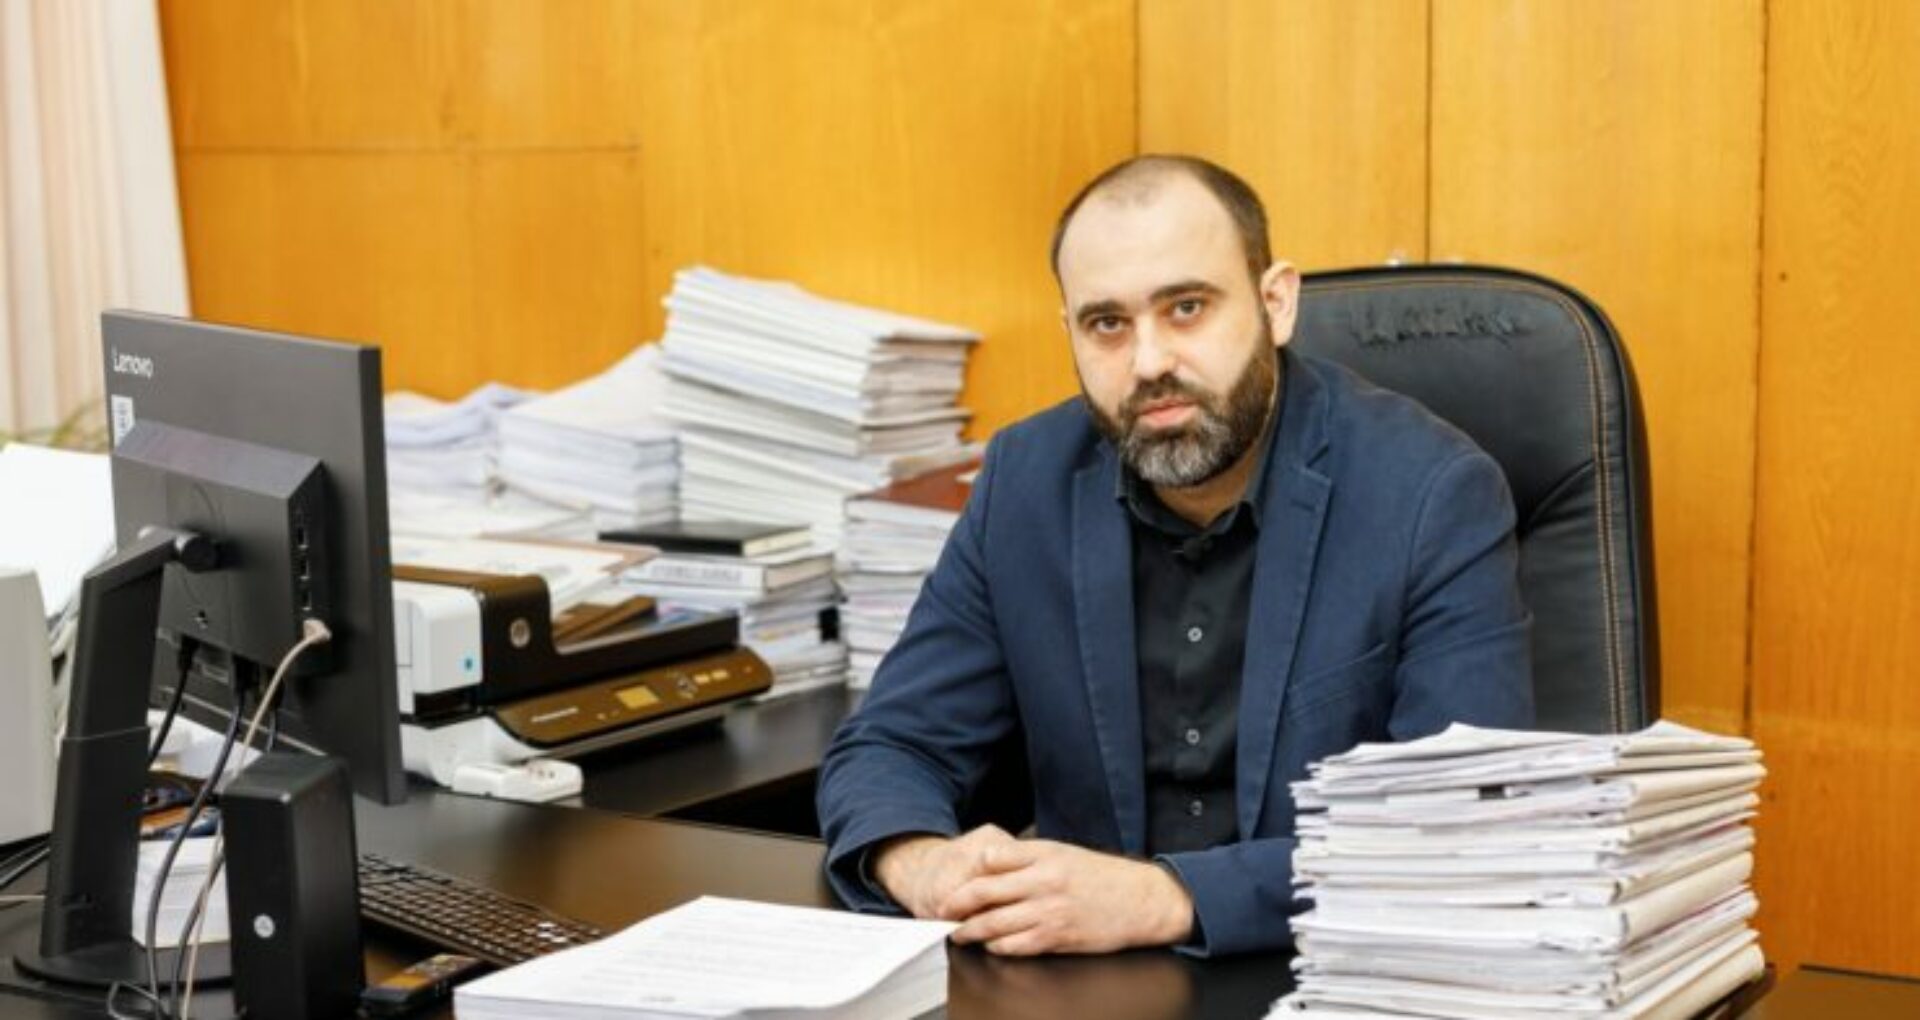 A magistrate of the Chisinau Court proposes to conduct court hearings in digital mode for civil cases: “It can reduce costs and travel time”